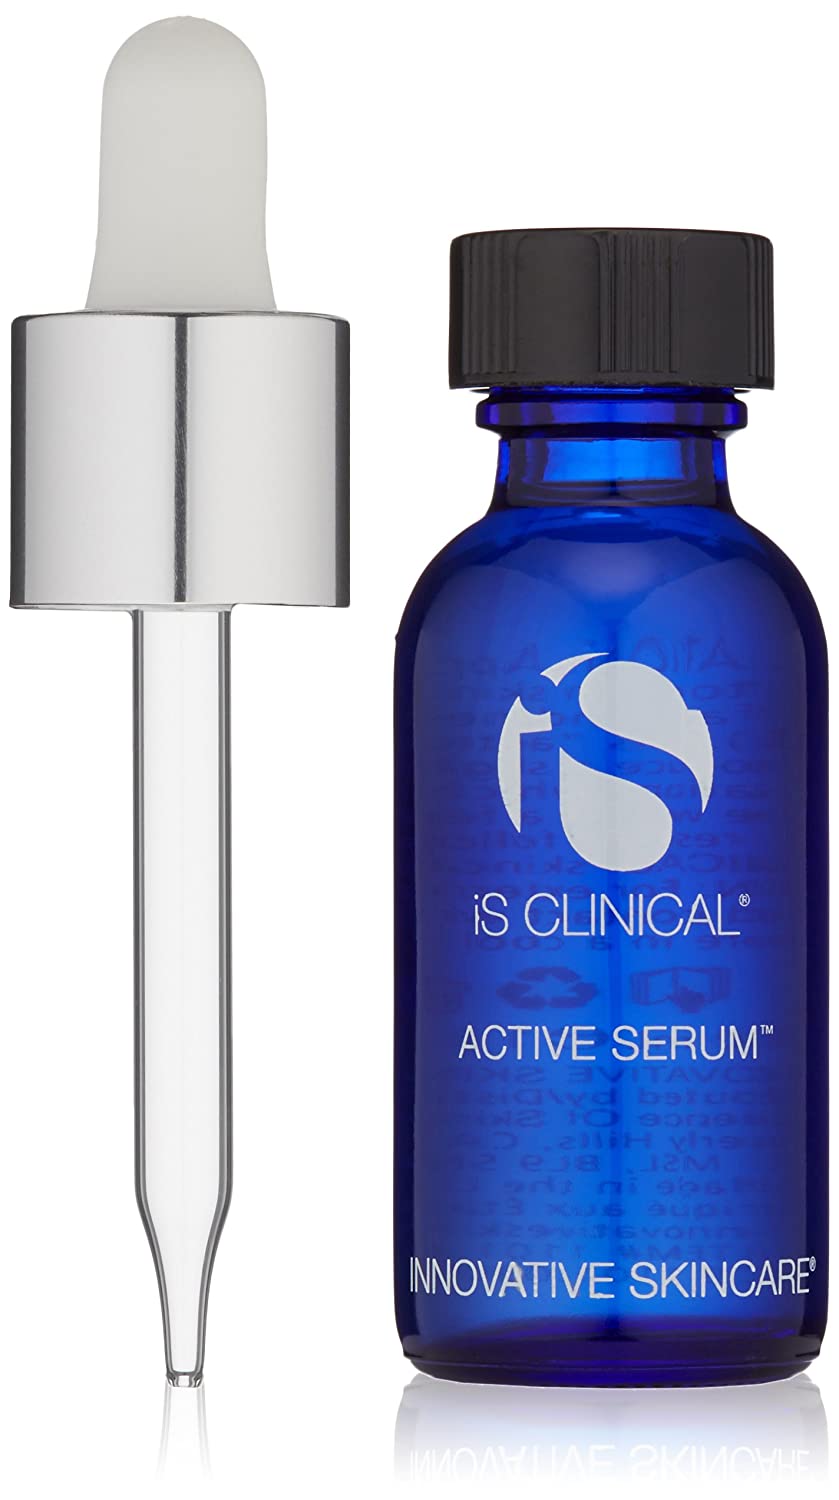 IsClinical Active Serum - Totality Skincare